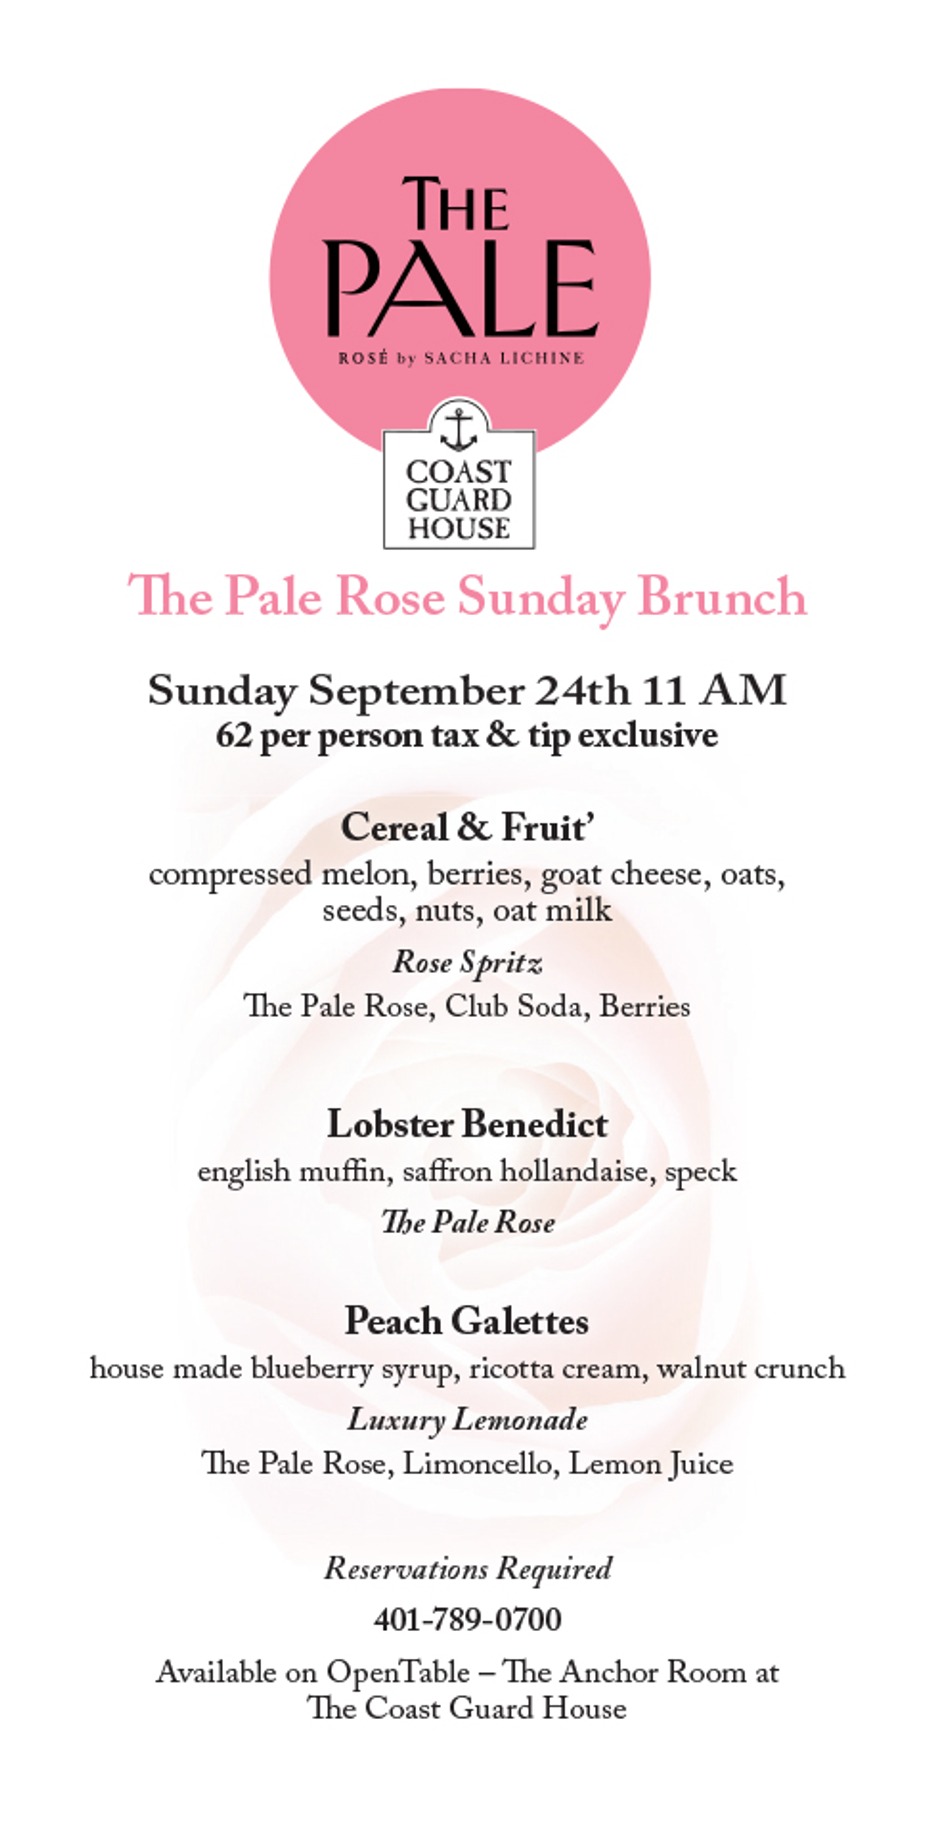 THE PALE: Rose Wine Brunch event photo